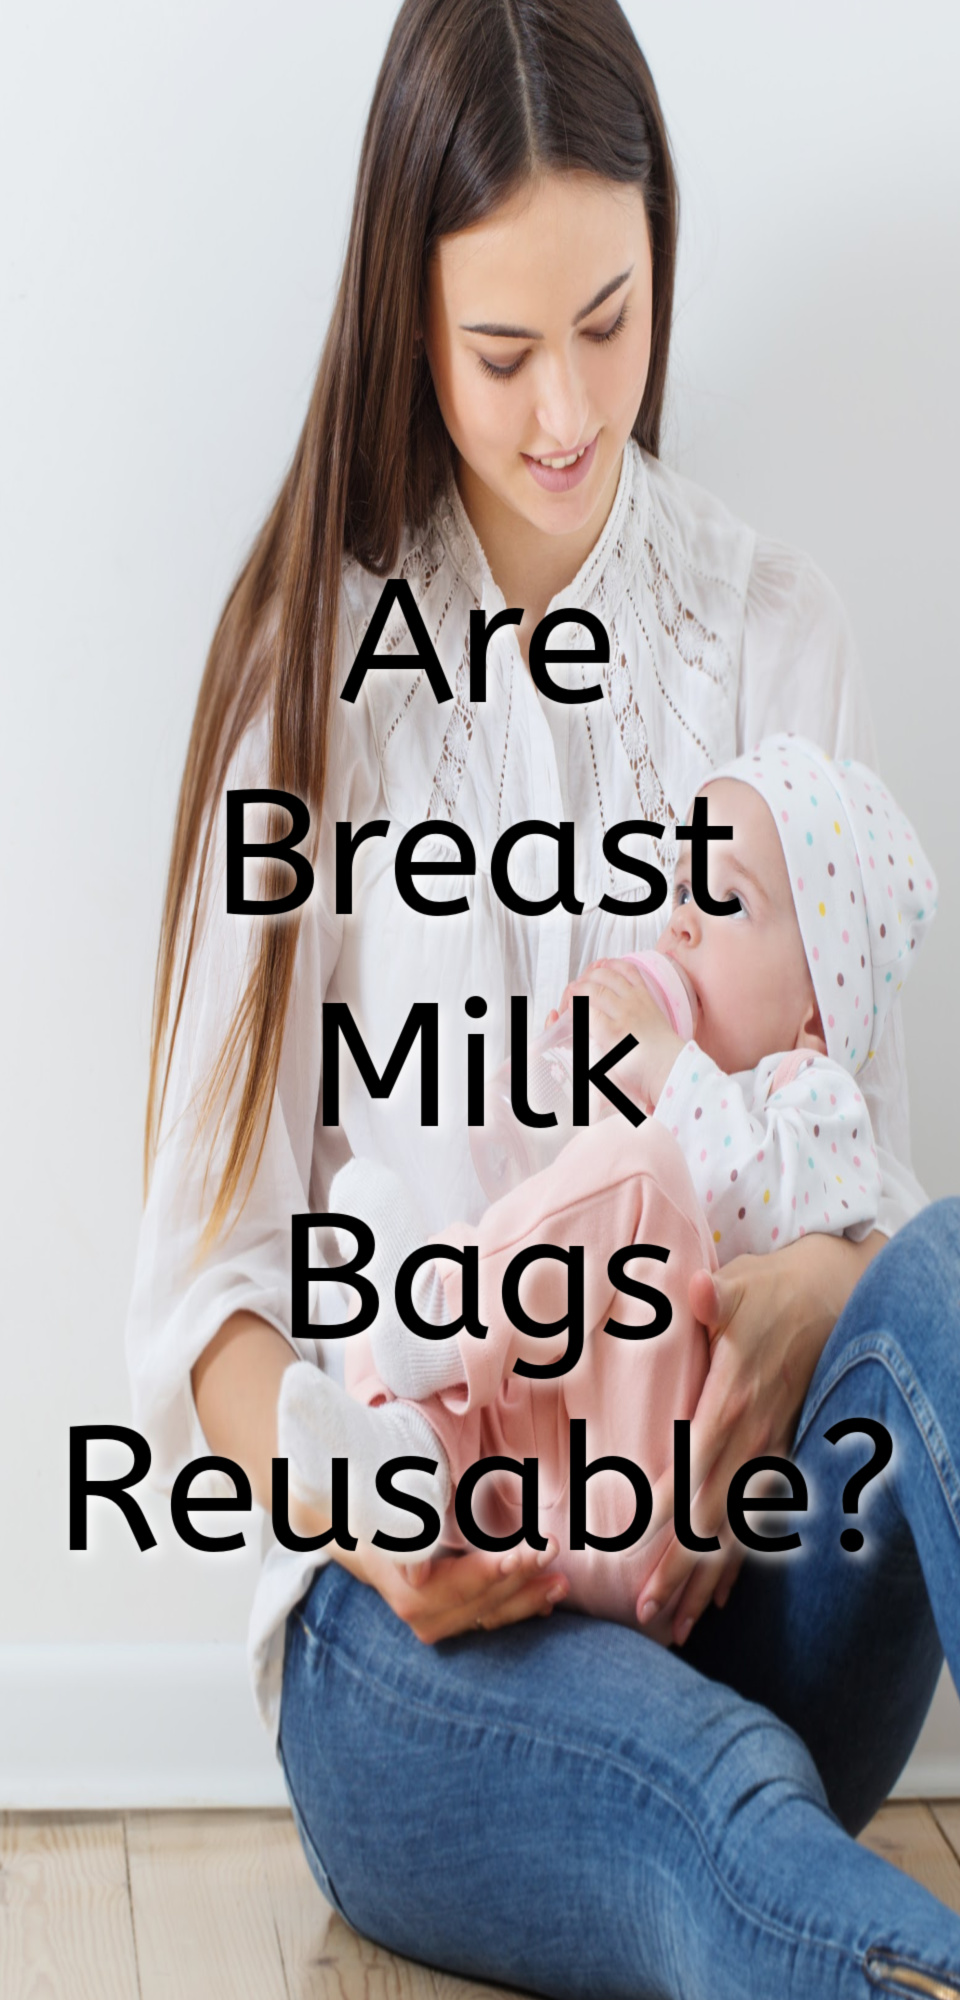 Are Breastmilk Bags Reusable?